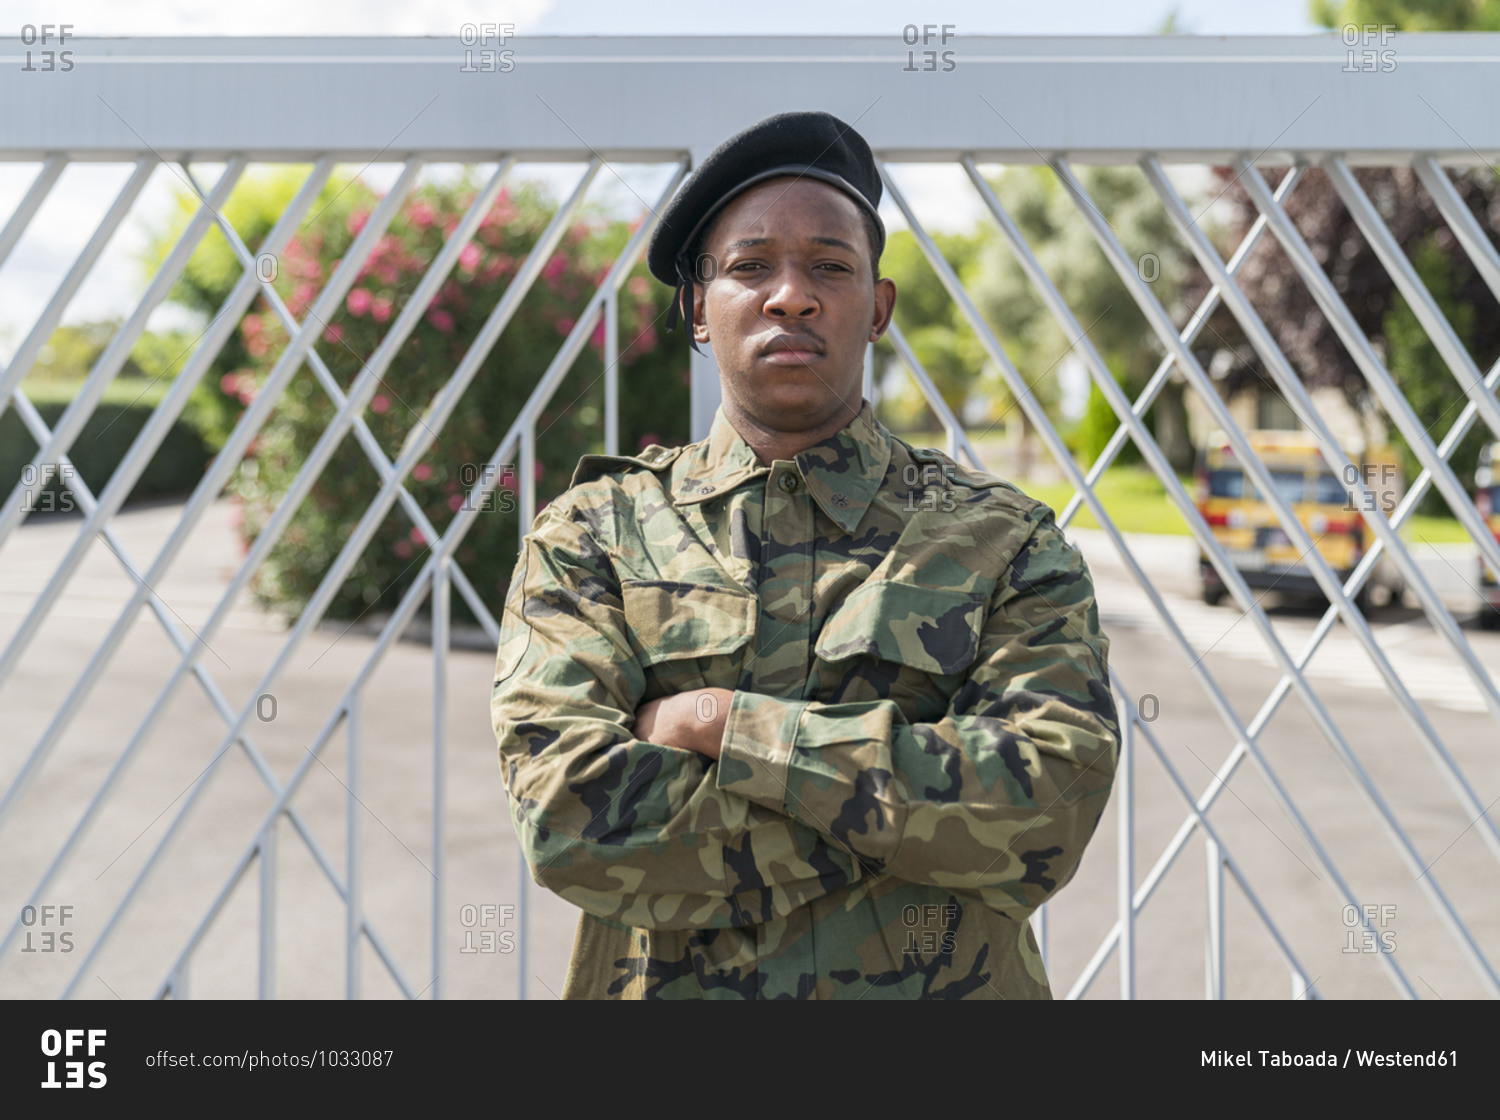 Confident army soldier standing with arms crossed against gate